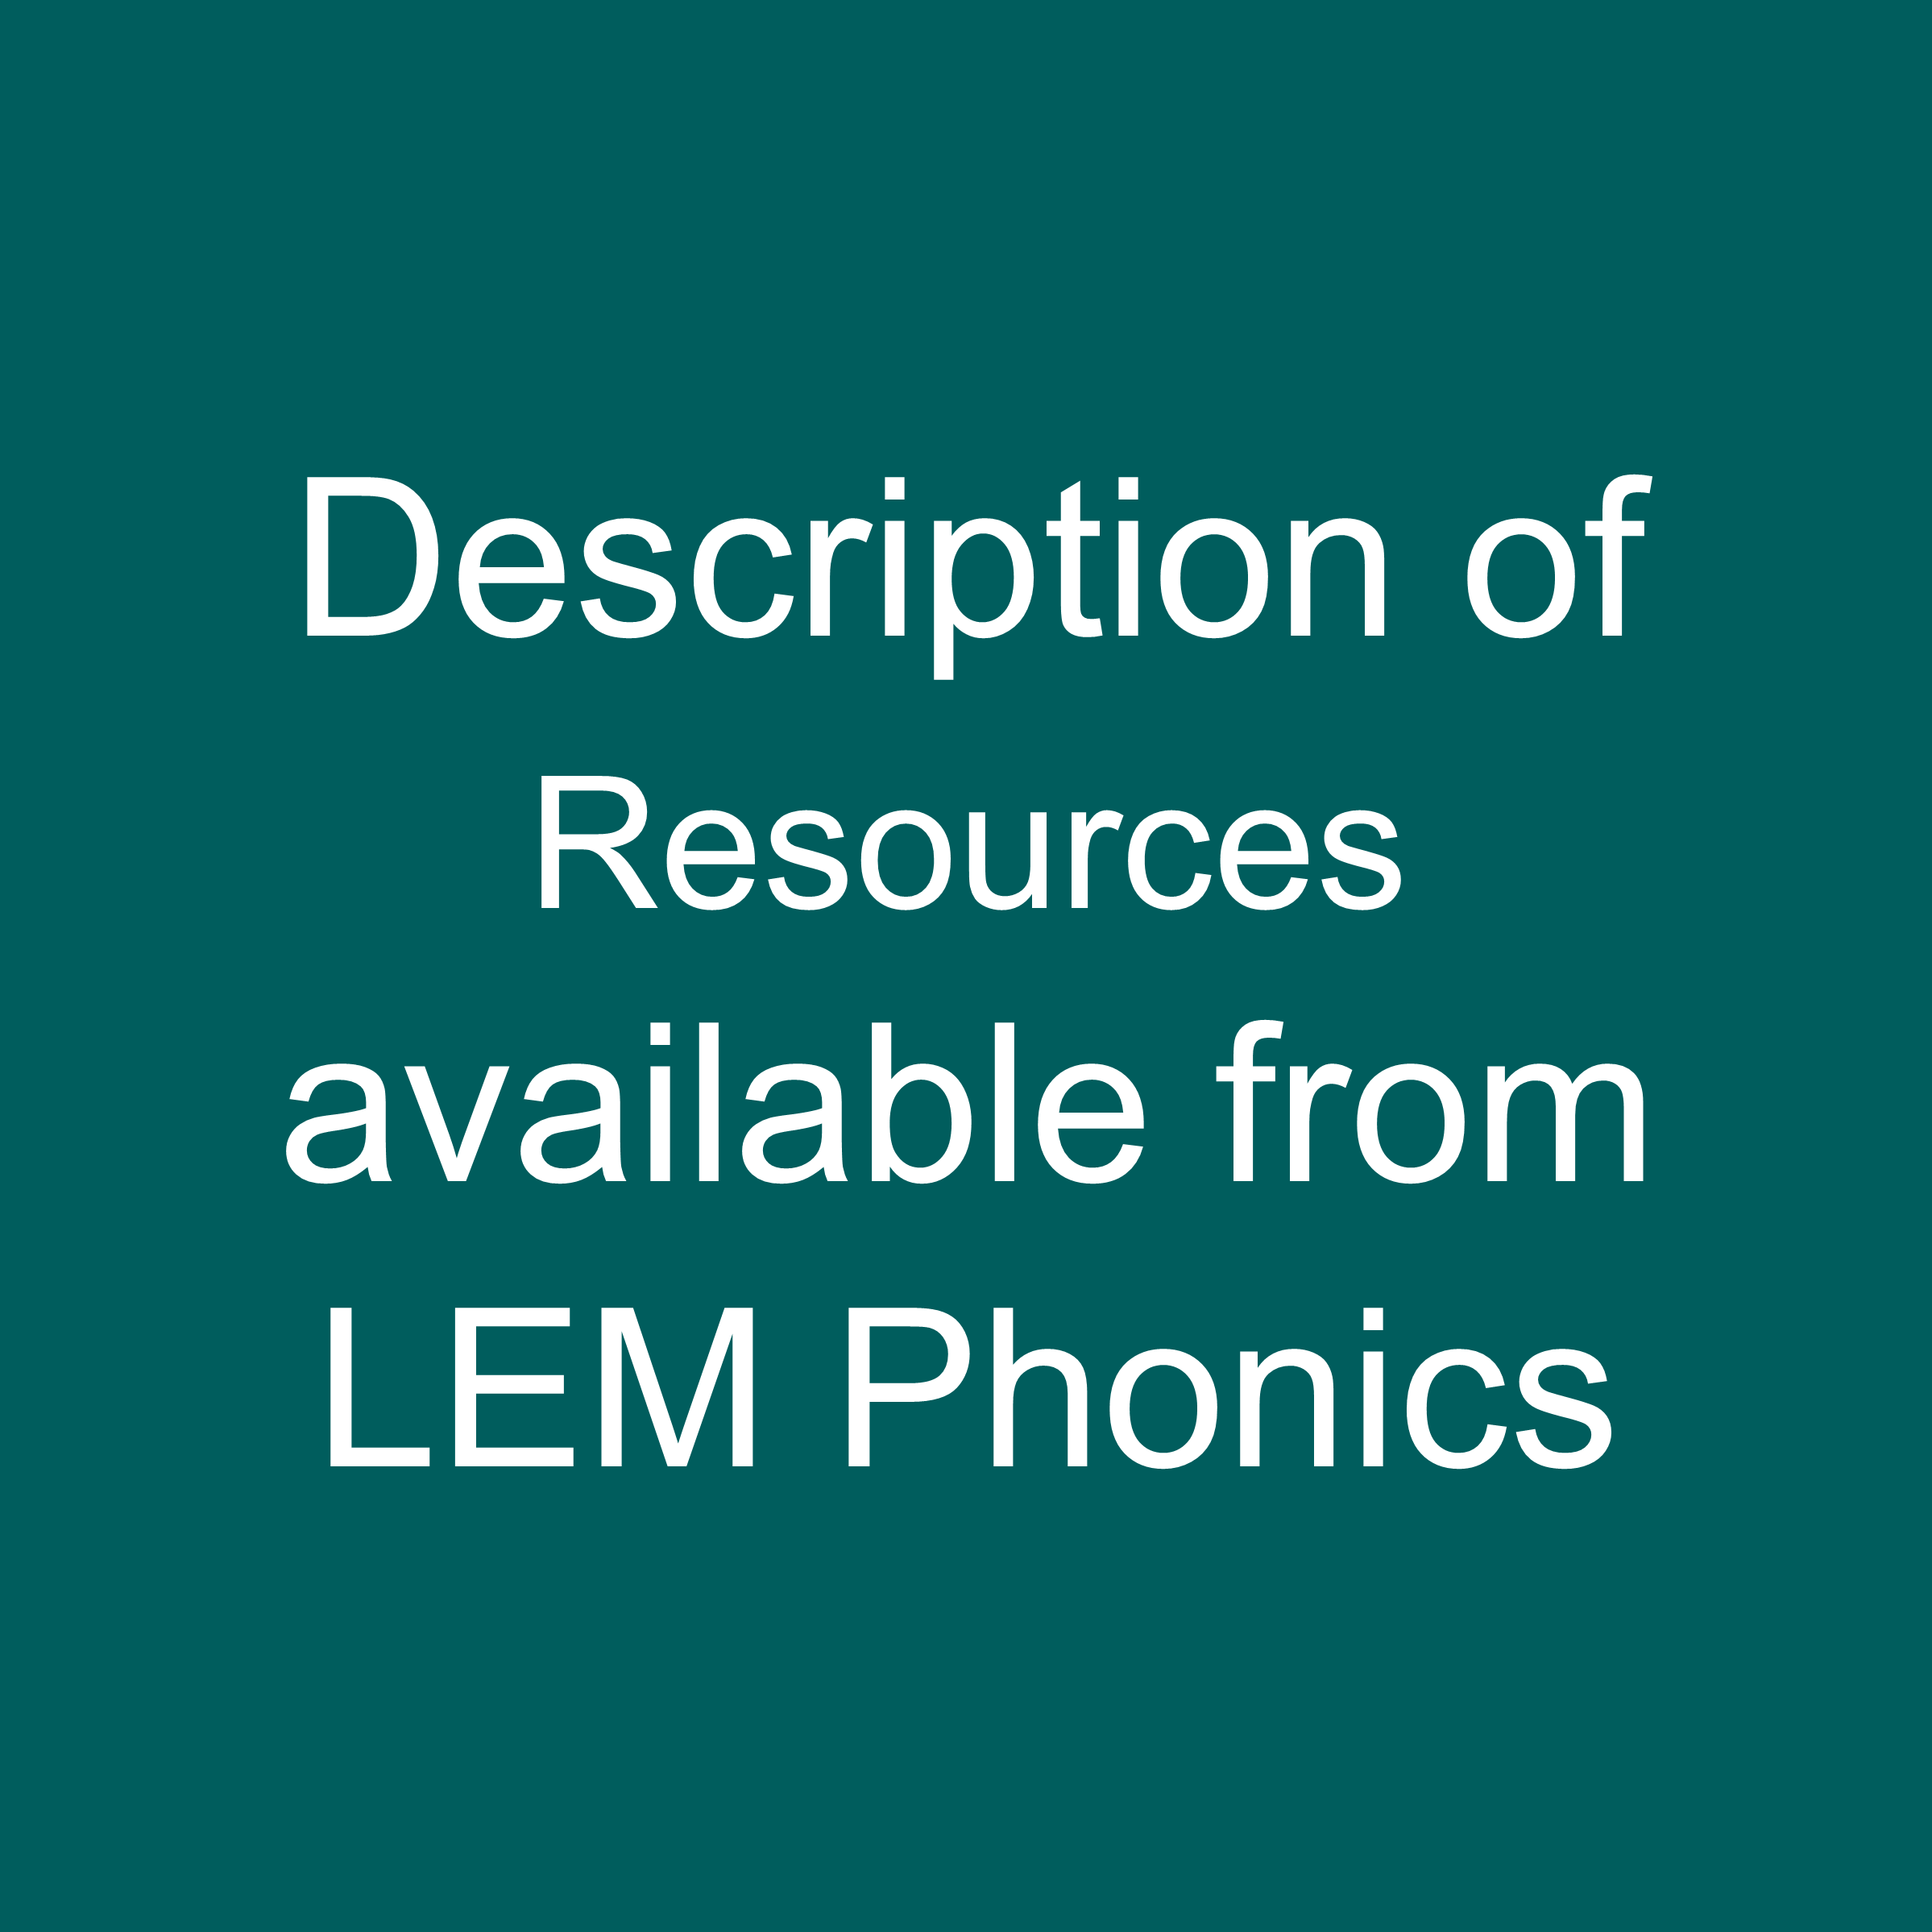 Description of resources available from LEM Phonics